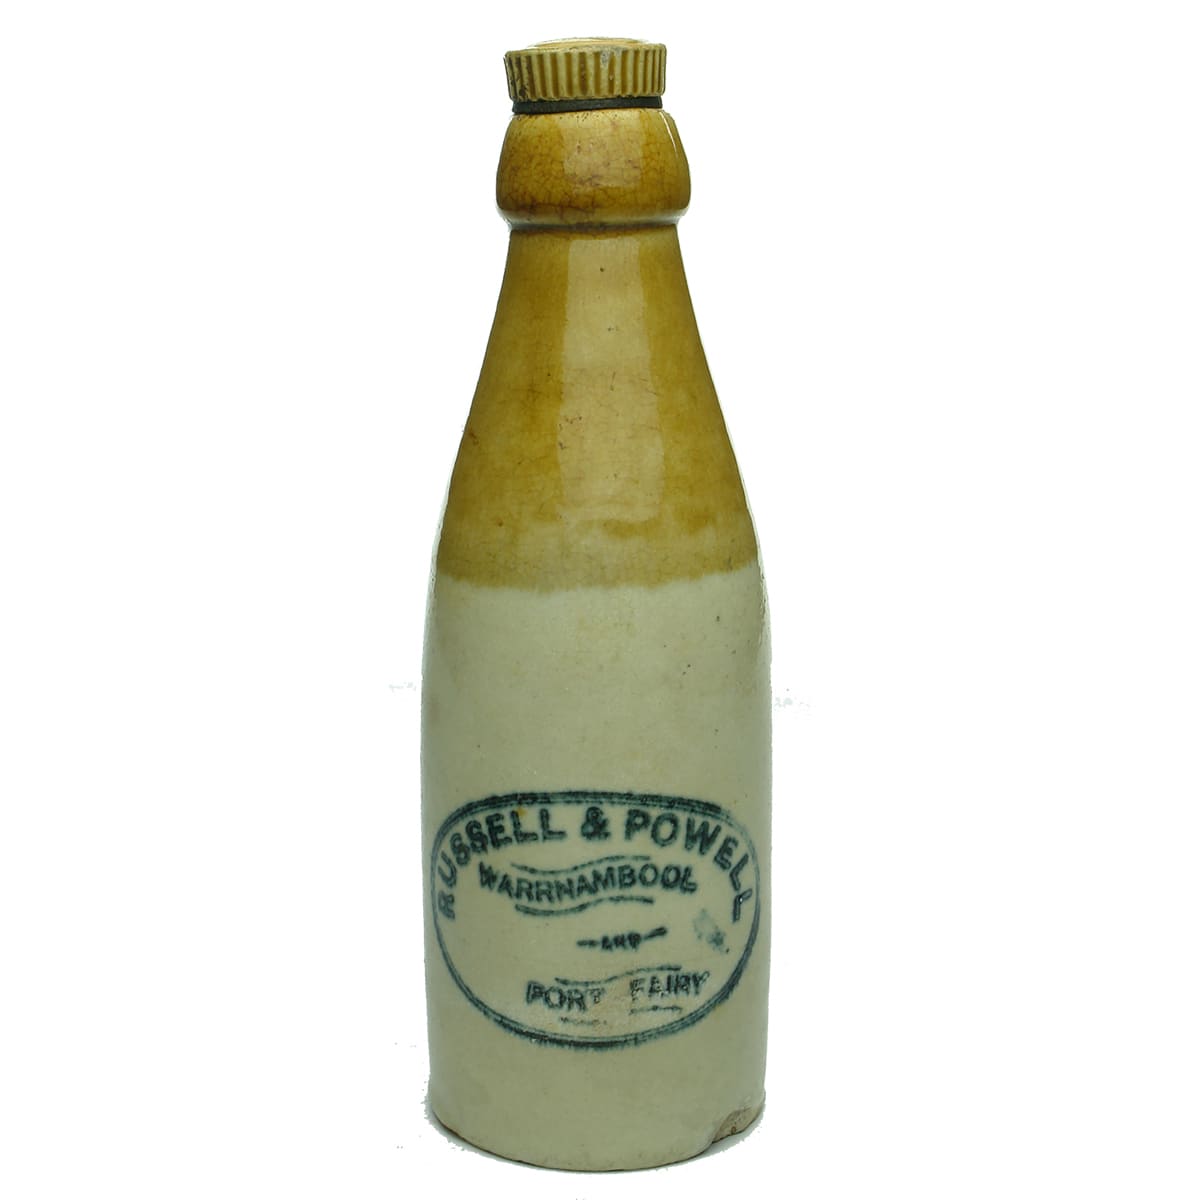 Ginger Beer. Russell & Powell, Warrnambool and Port Fairy. Internal Thread. Tan Top. 10 oz. (Victoria)